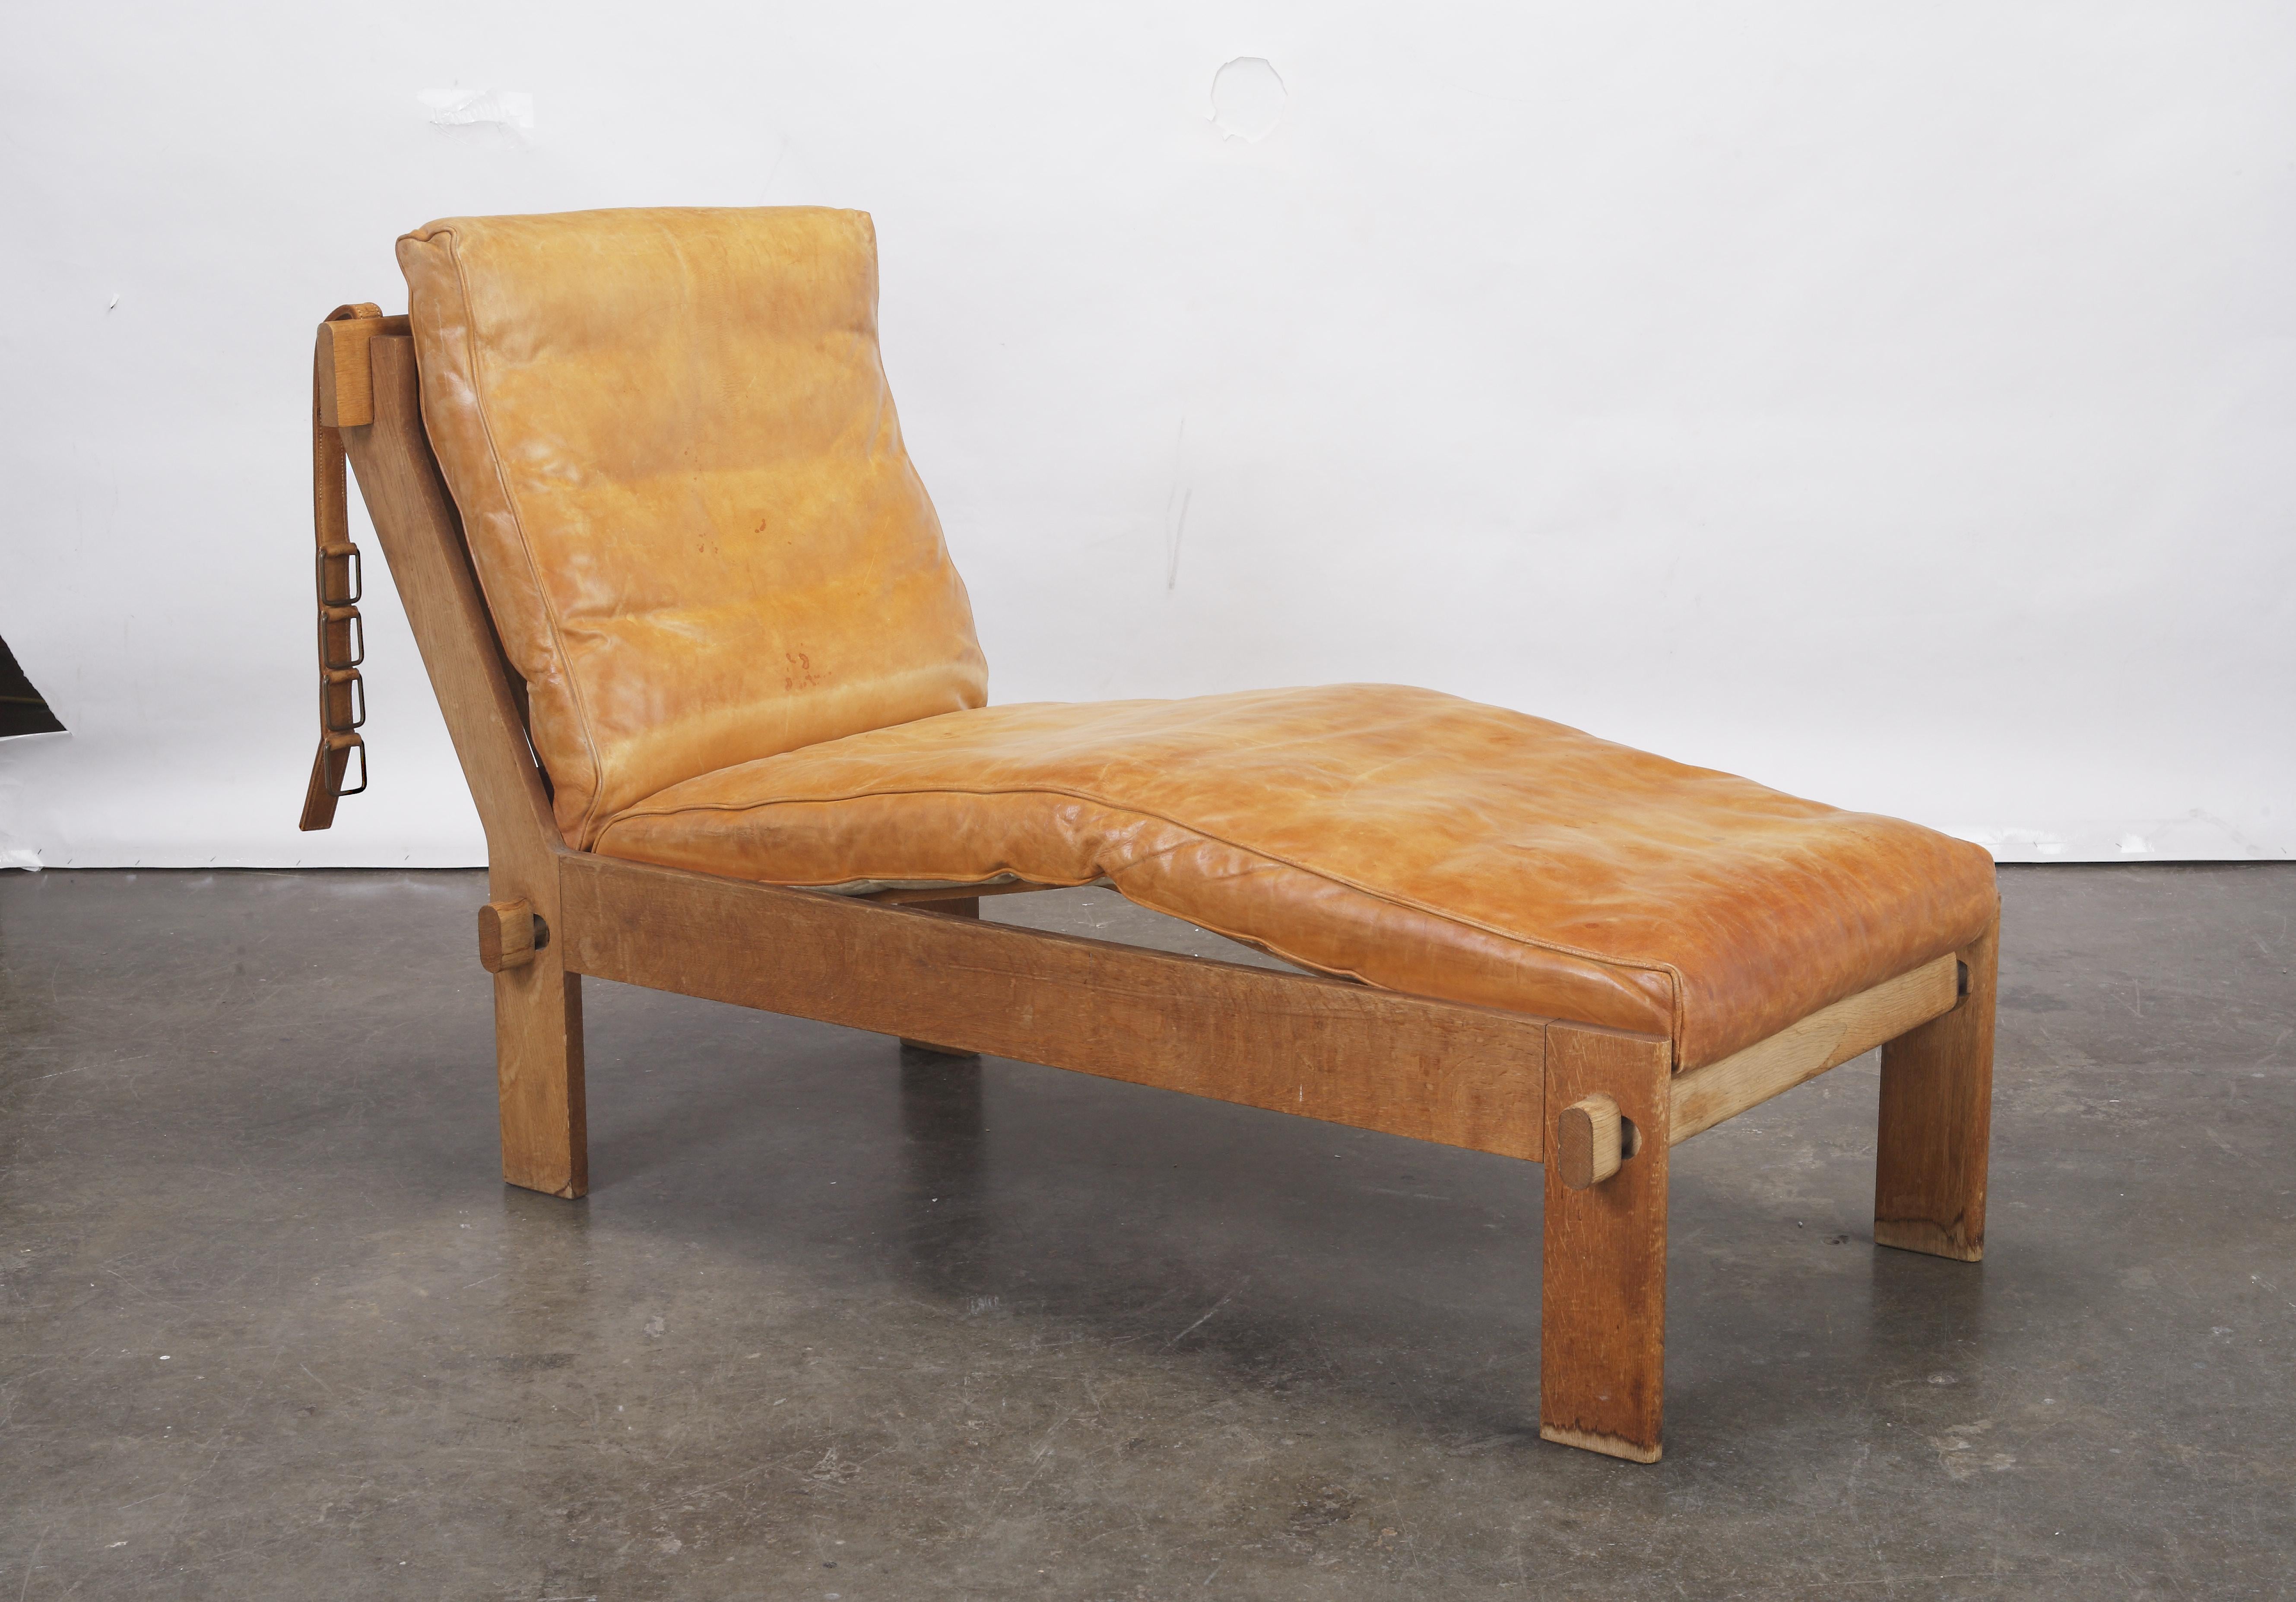 An extremely rare and colleactable piece of Danish modern design - a Tage Poulsen daybed / chaise longue recliner, made in Denmark in the late 1960s. Oak frame and beautifully patinated original leather mattress / cushions. The head rest extends